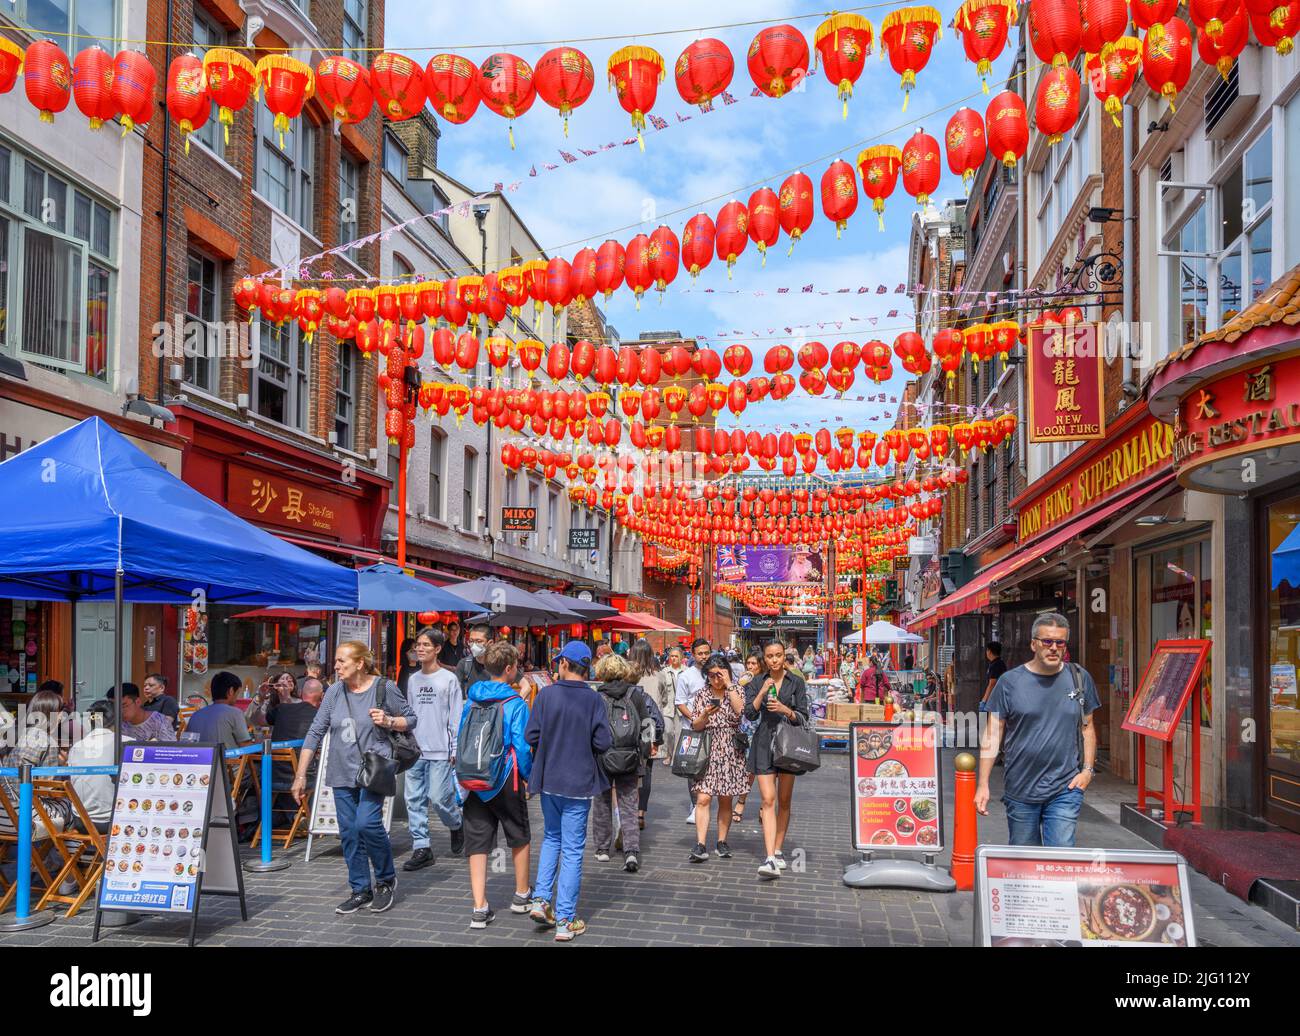 Gerrard Street, Chinatown, Soho, Londres, Angleterre, ROYAUME-UNI Banque D'Images